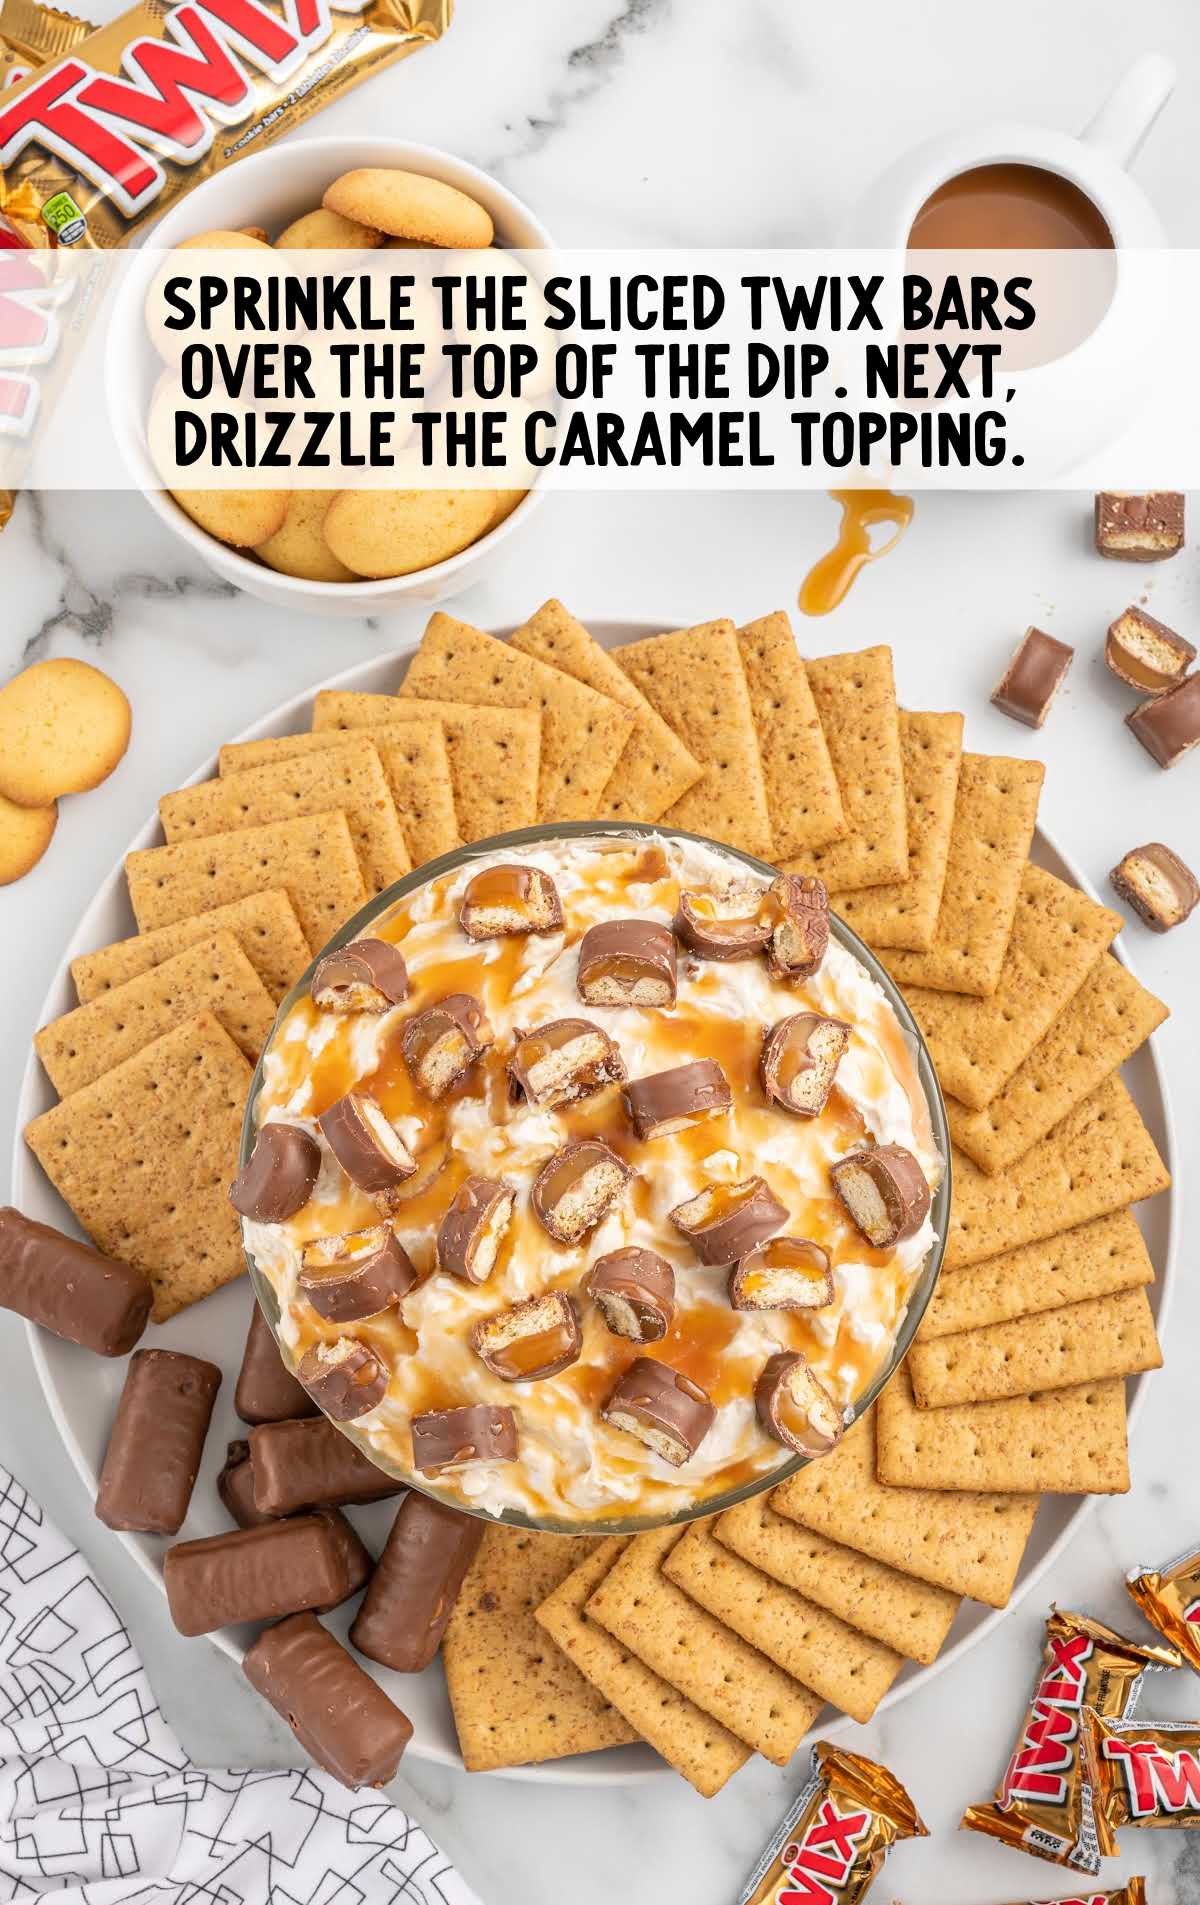 twix bars sprinkled over the top of the dip as well as caramel dip